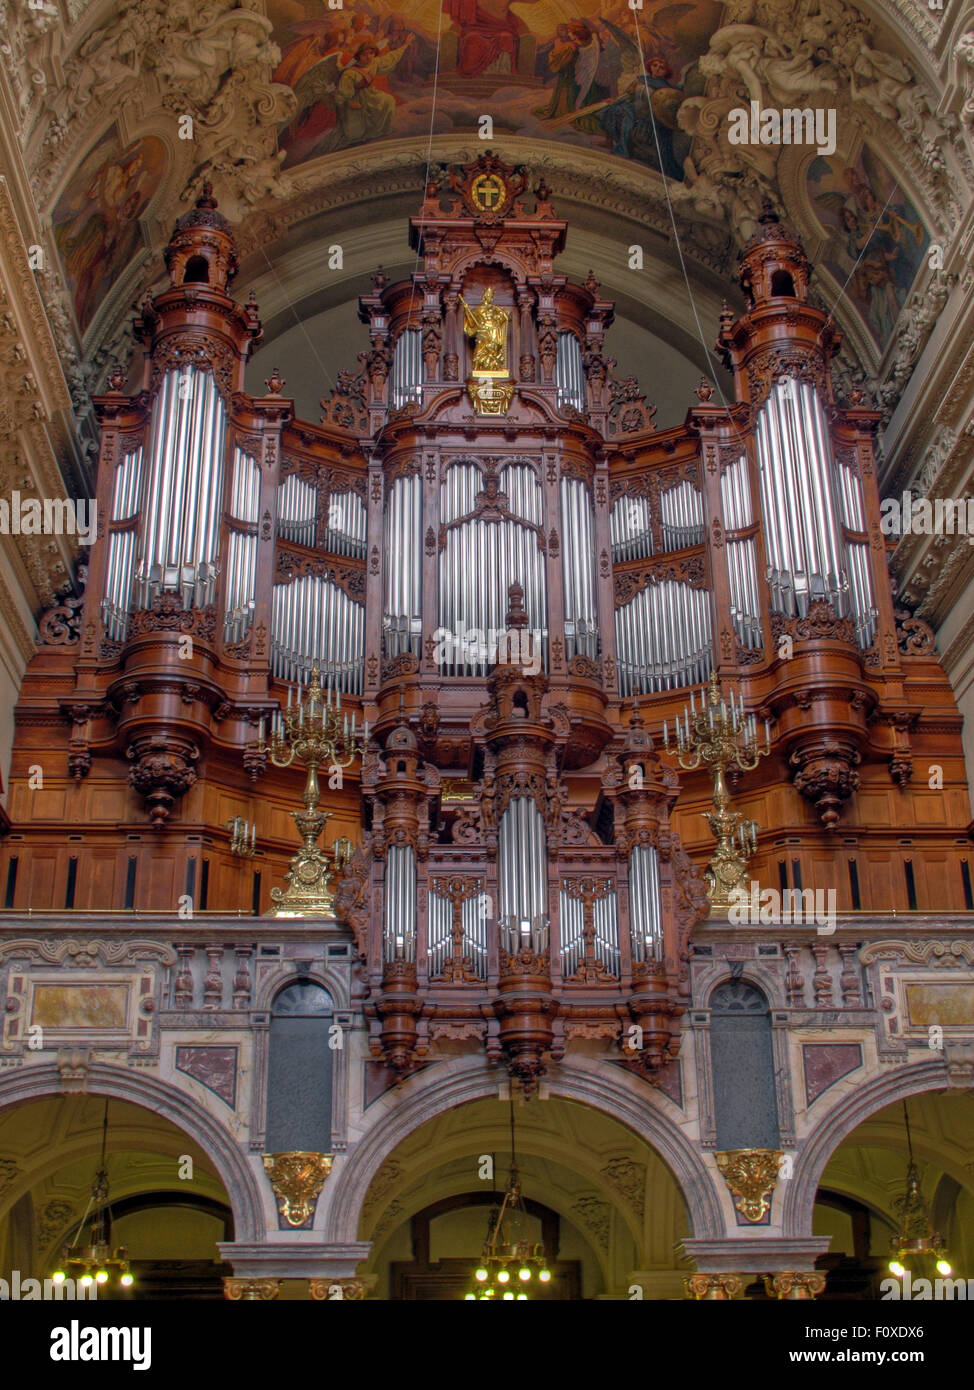 Berlin Cathedral - Wilhelm Carl Friedrich Sauer Organ pipes and ceiling, Germany Stock Photo